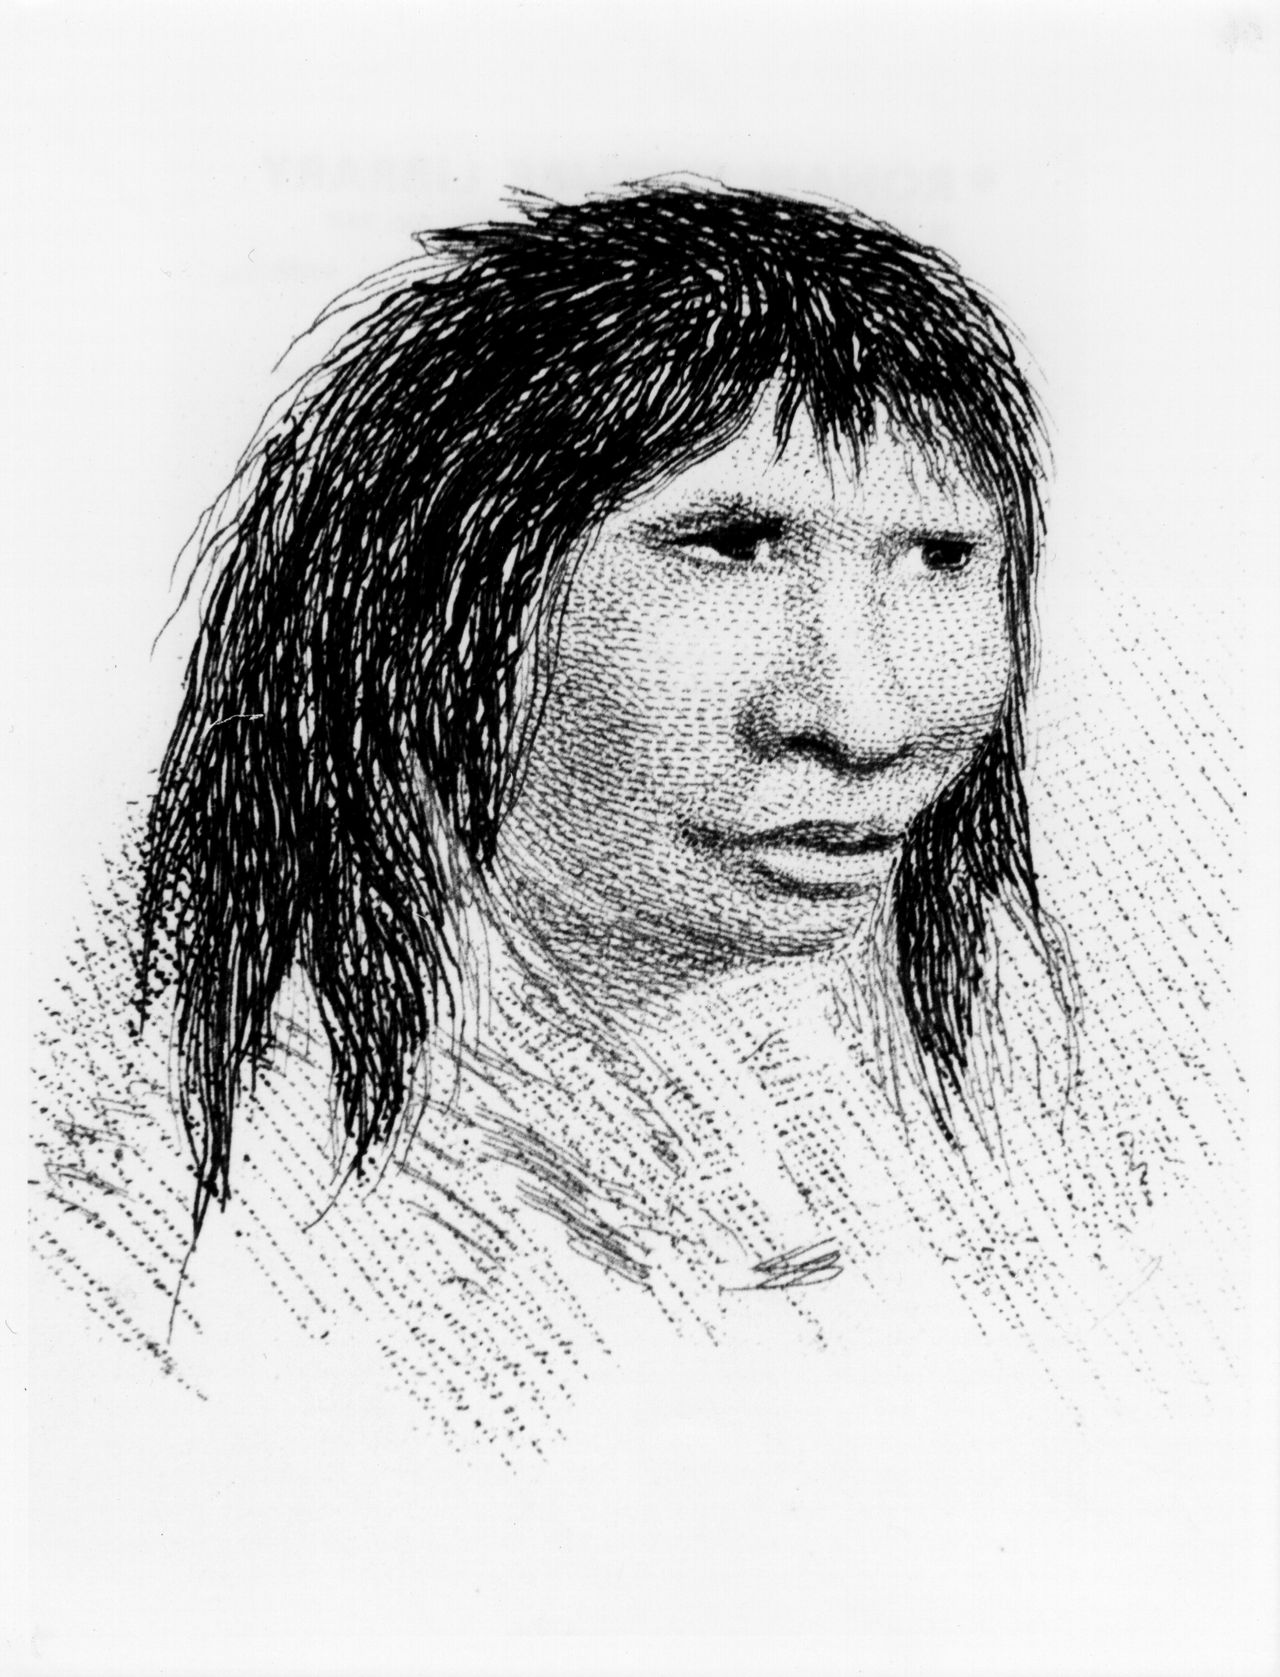 Jemmy Button, the Fuegian 'adopted' by Fitzroy's expedition, in 1834 (1839).